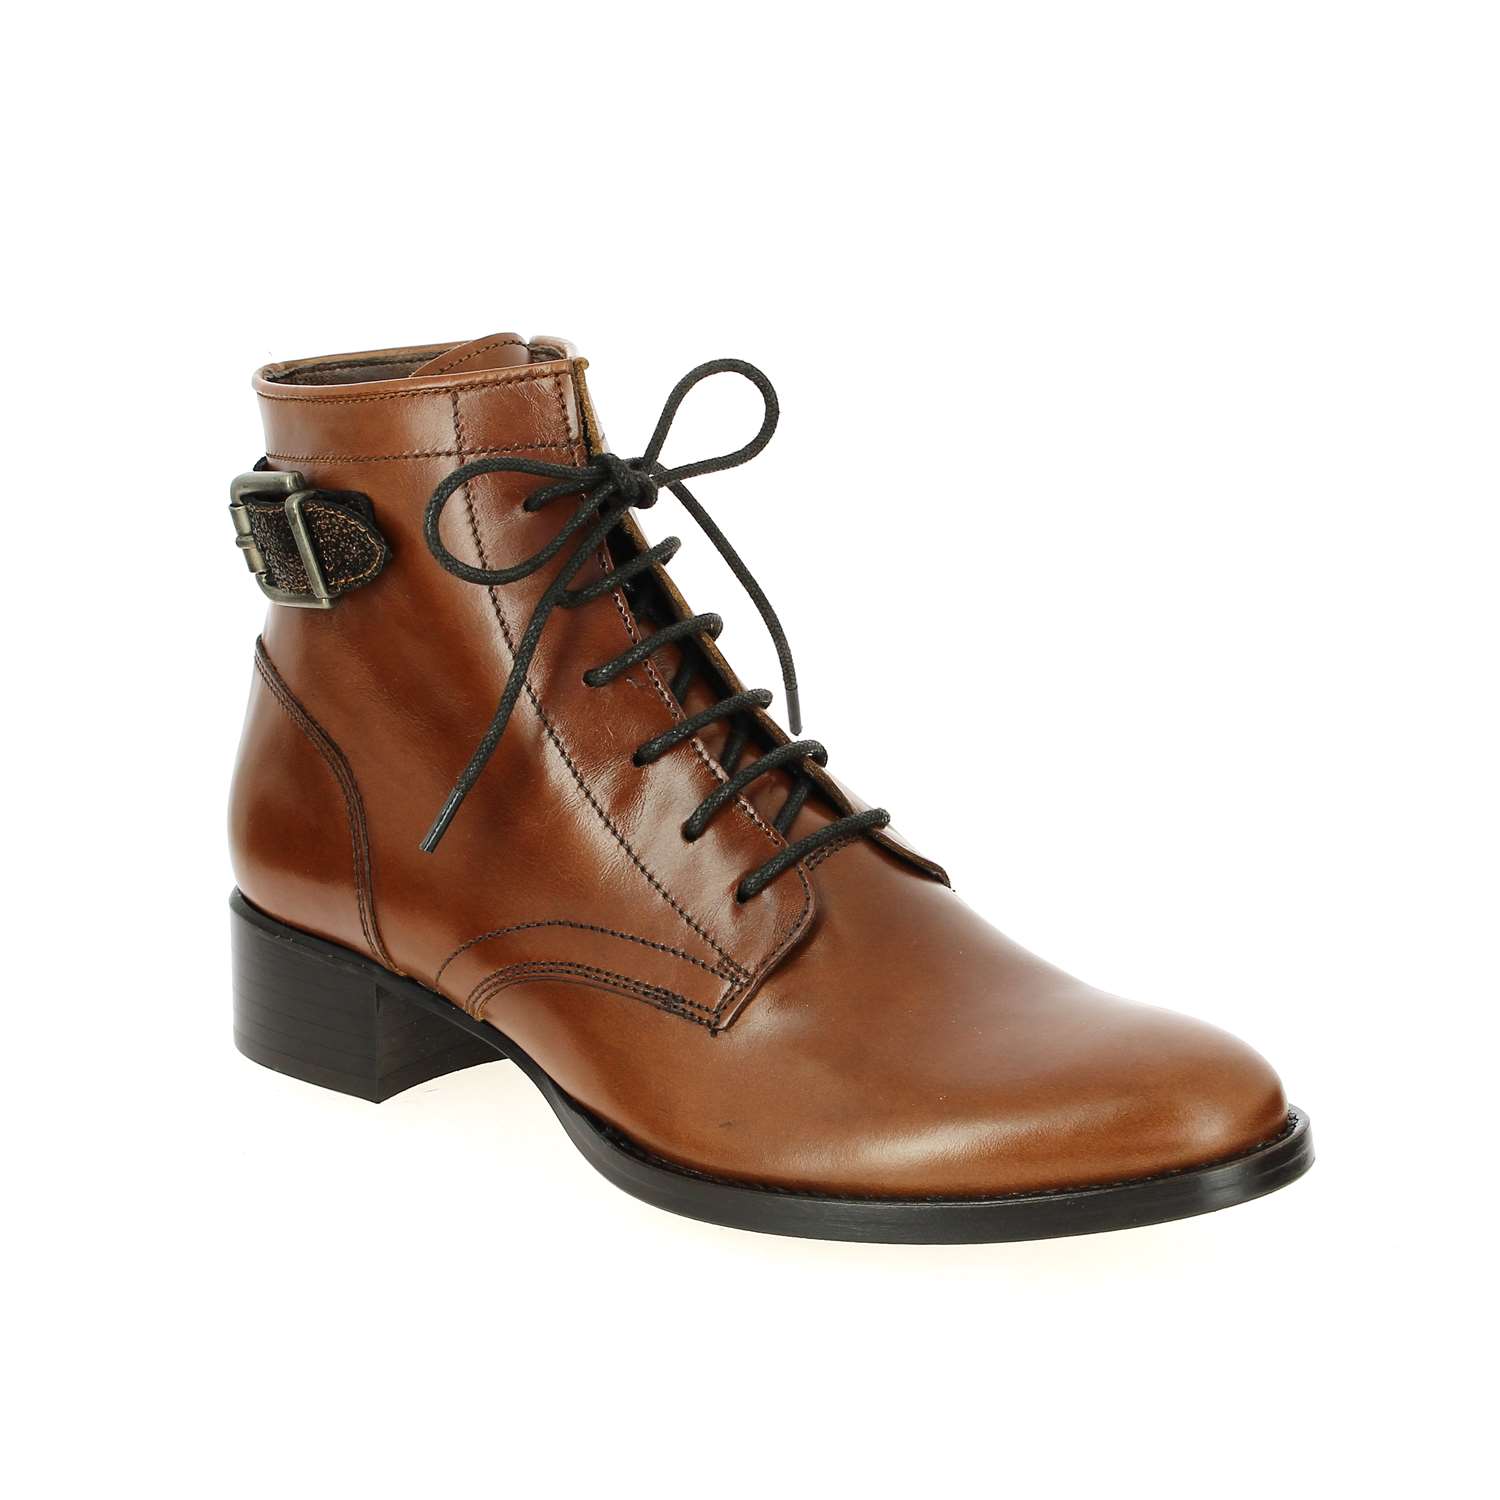 01 - ABY - MURATTI - Boots et bottines - Cuir